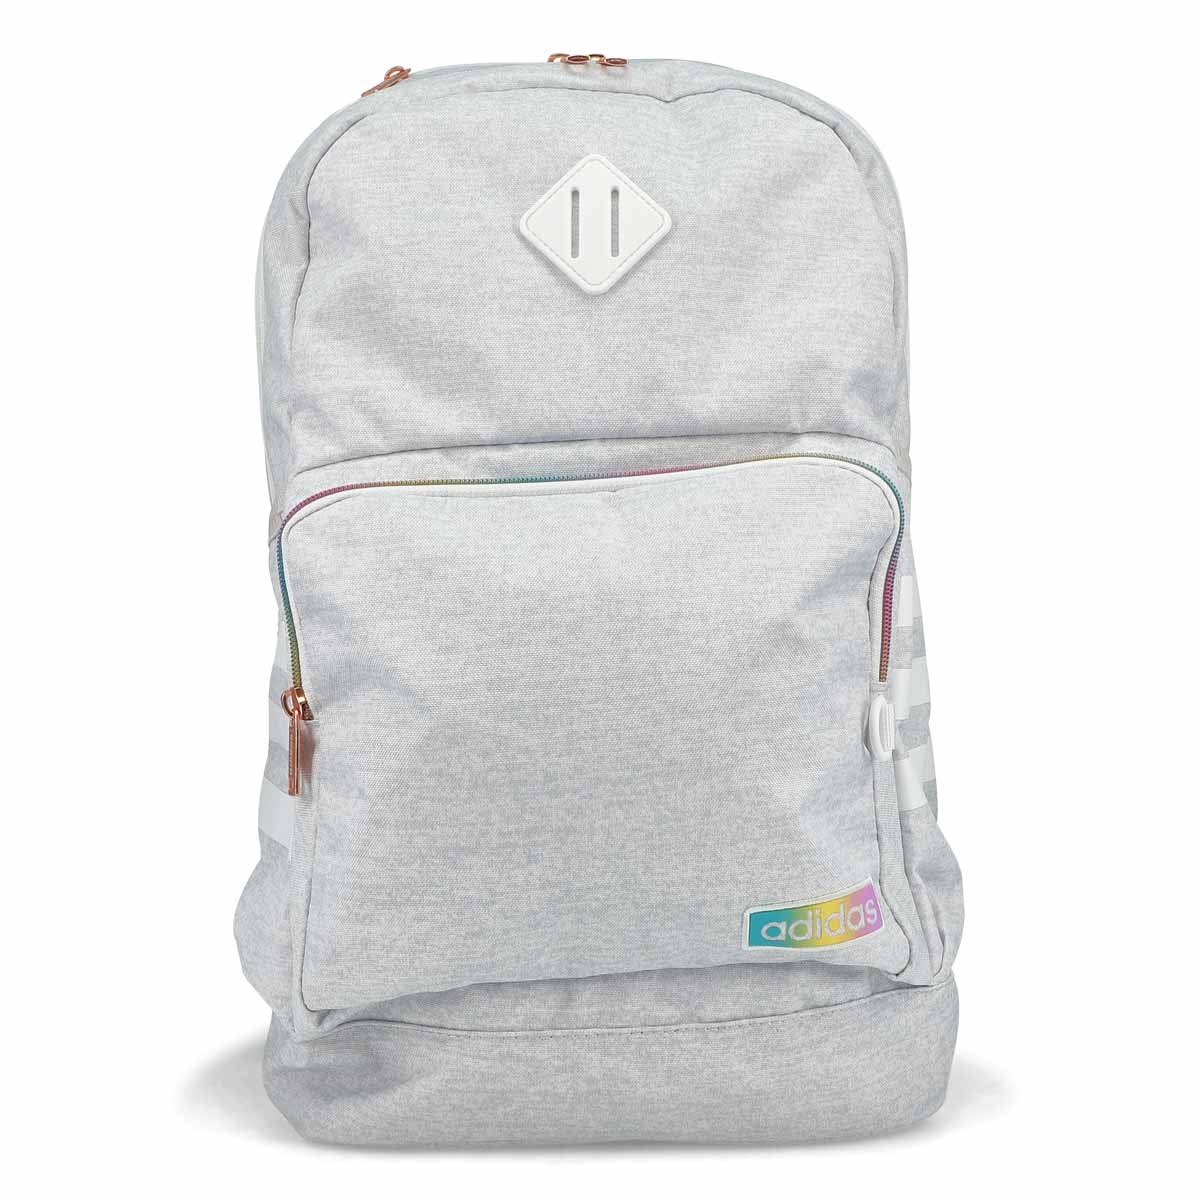 Adidas Classic 3S IV Backpack - Jersey/White/Rainbow